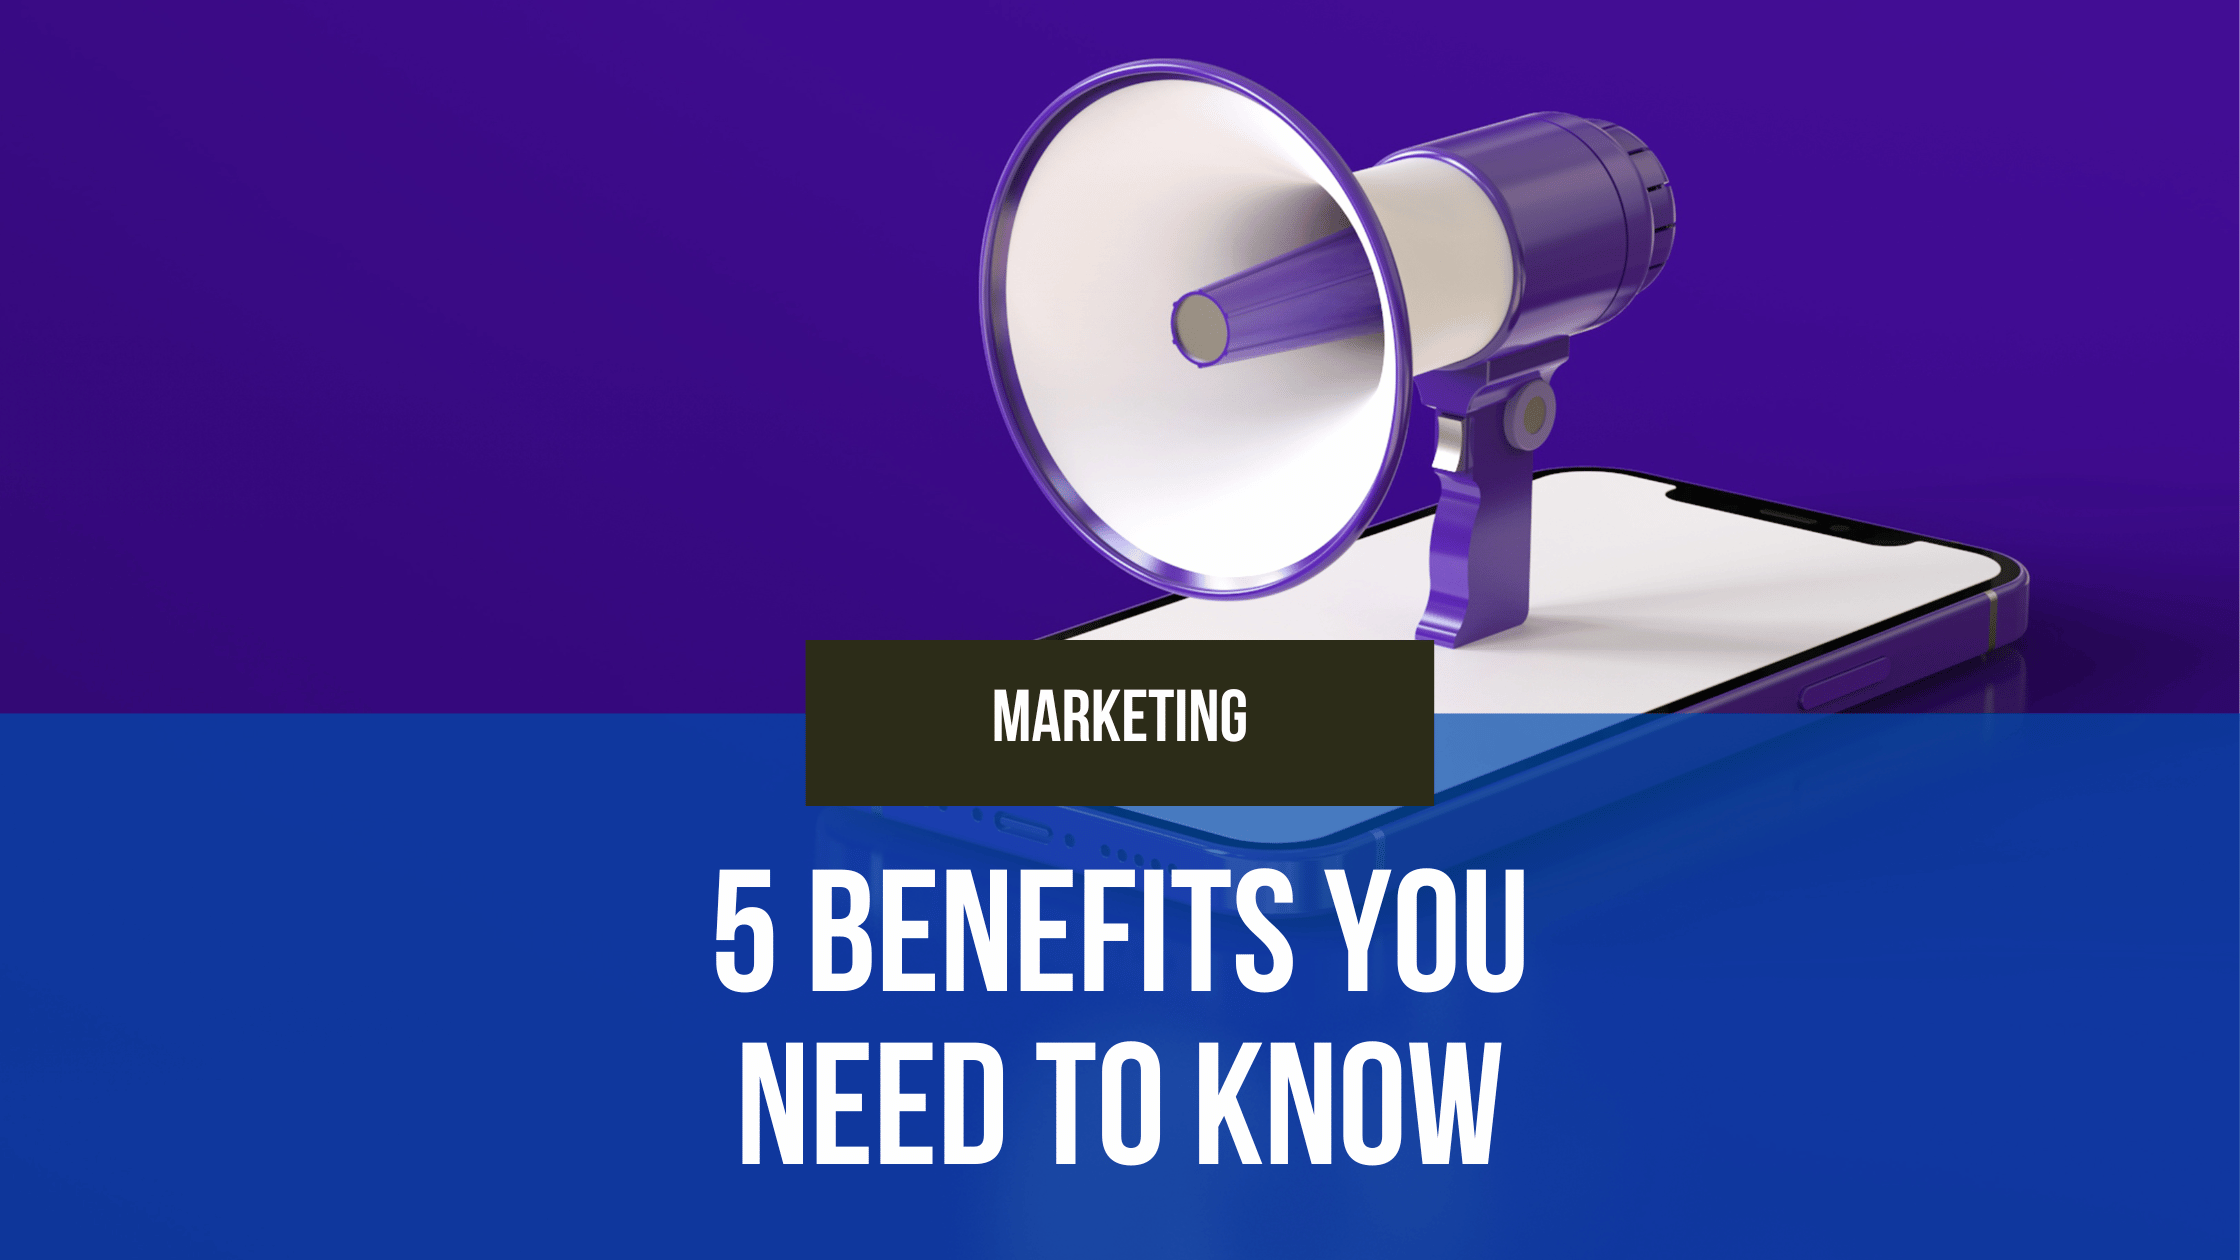 Boosting Your Brand Marketing: 5 Unforgettable Benefits You Need to Know